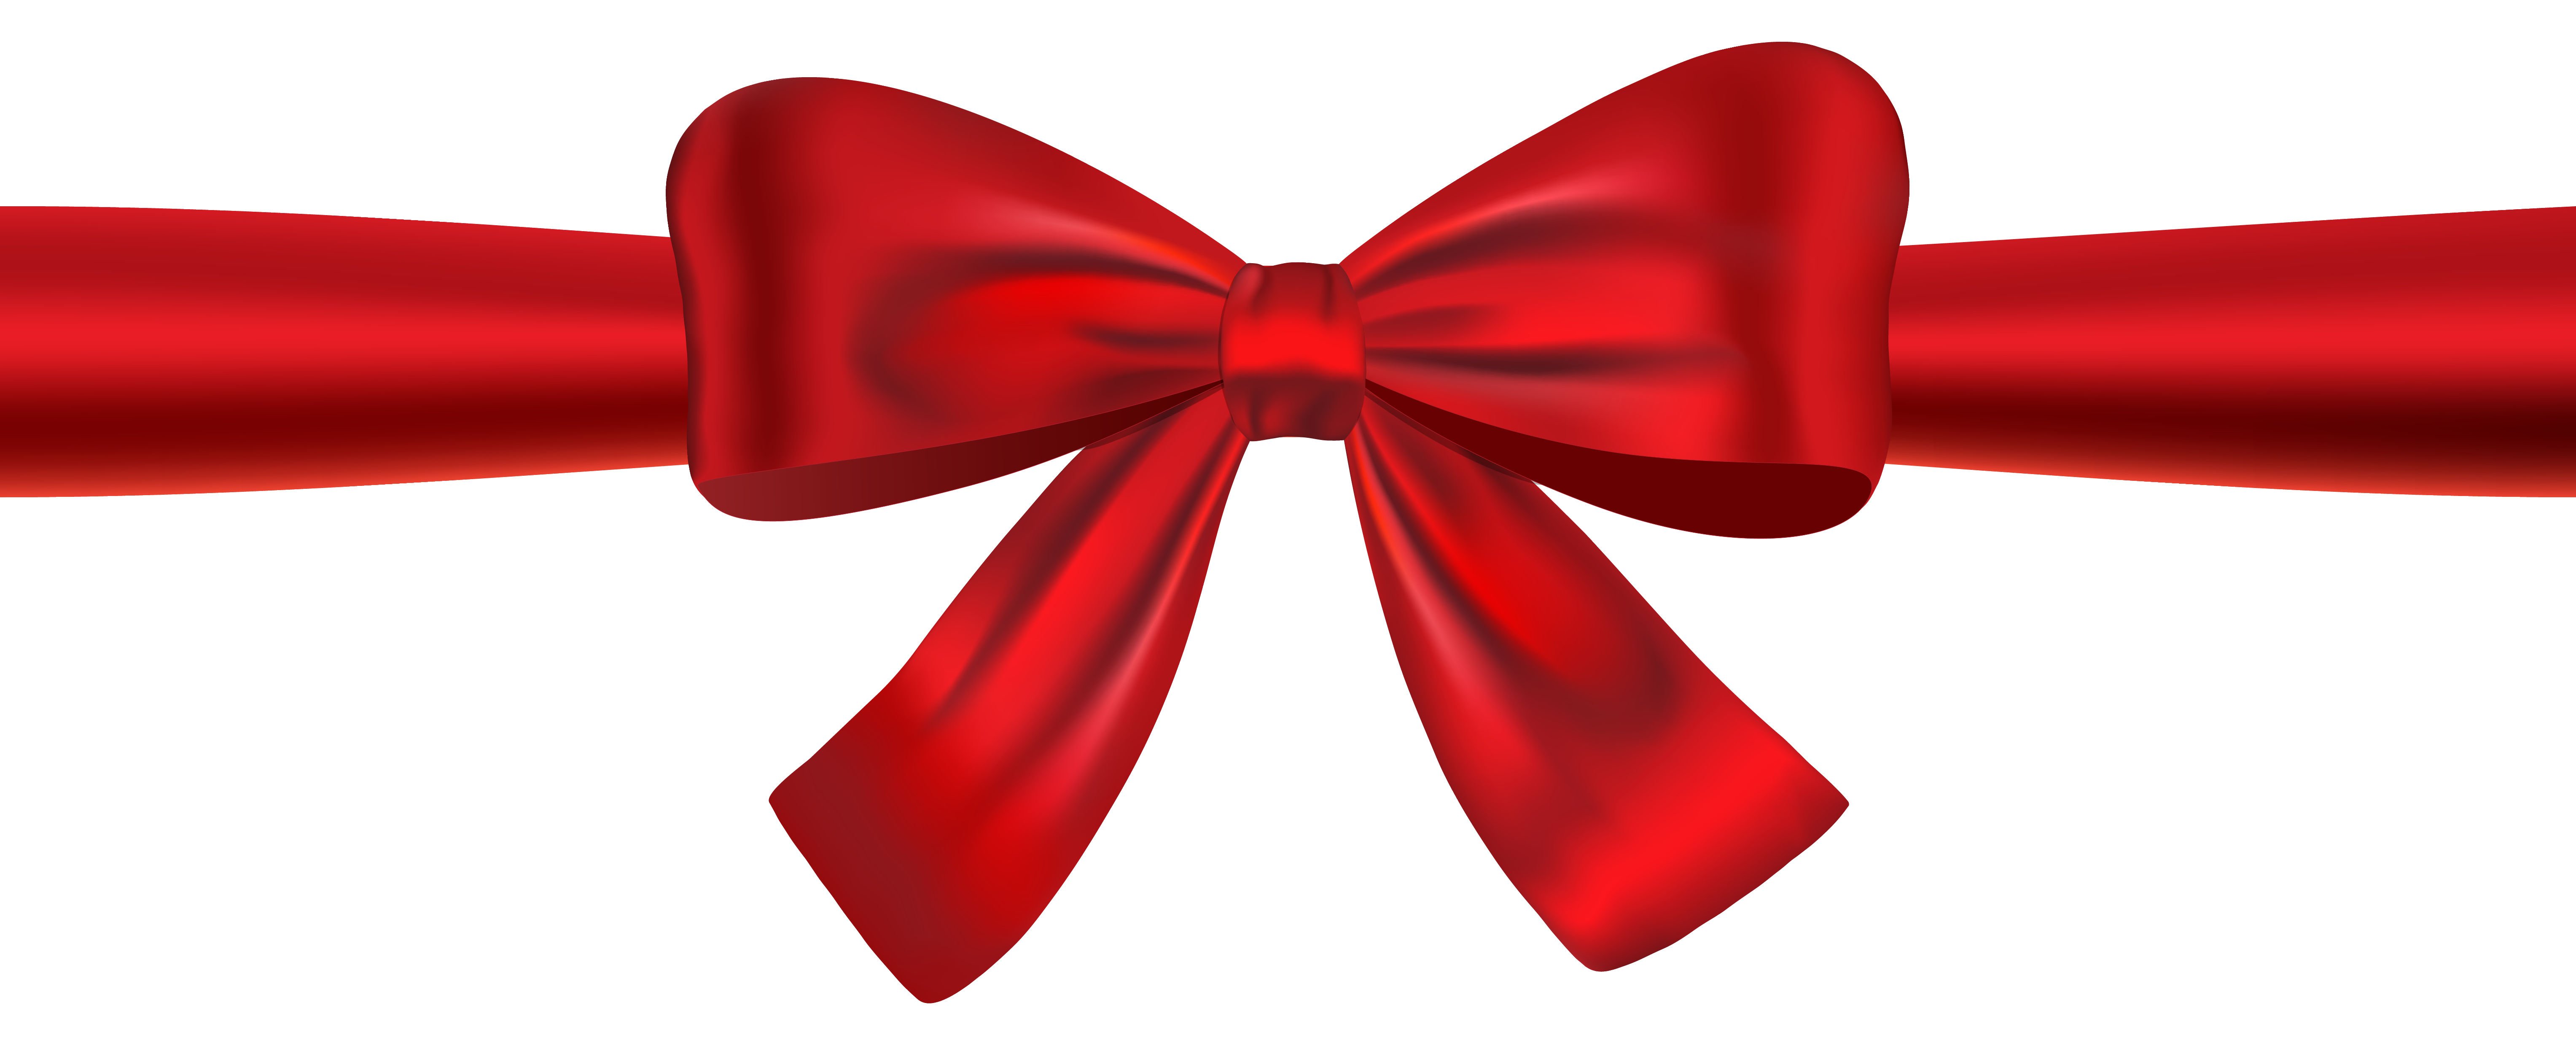 Red Ribbon and Bow PNG Clipart Image | Gallery Yopriceville - High